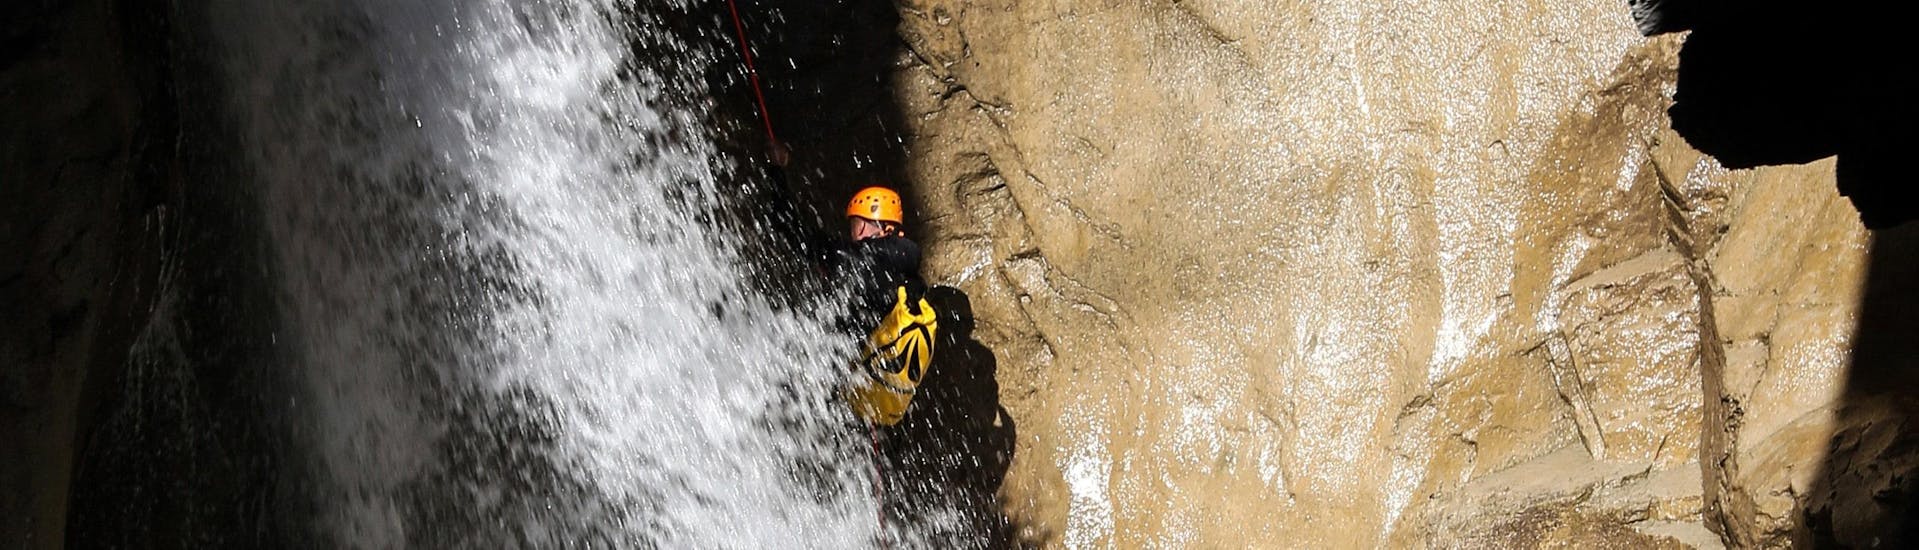 A man is abseiling down a waterfall during his Canyoning in Canyon des Oules de Freissinières - Expert tour with SerreChe Canyon.